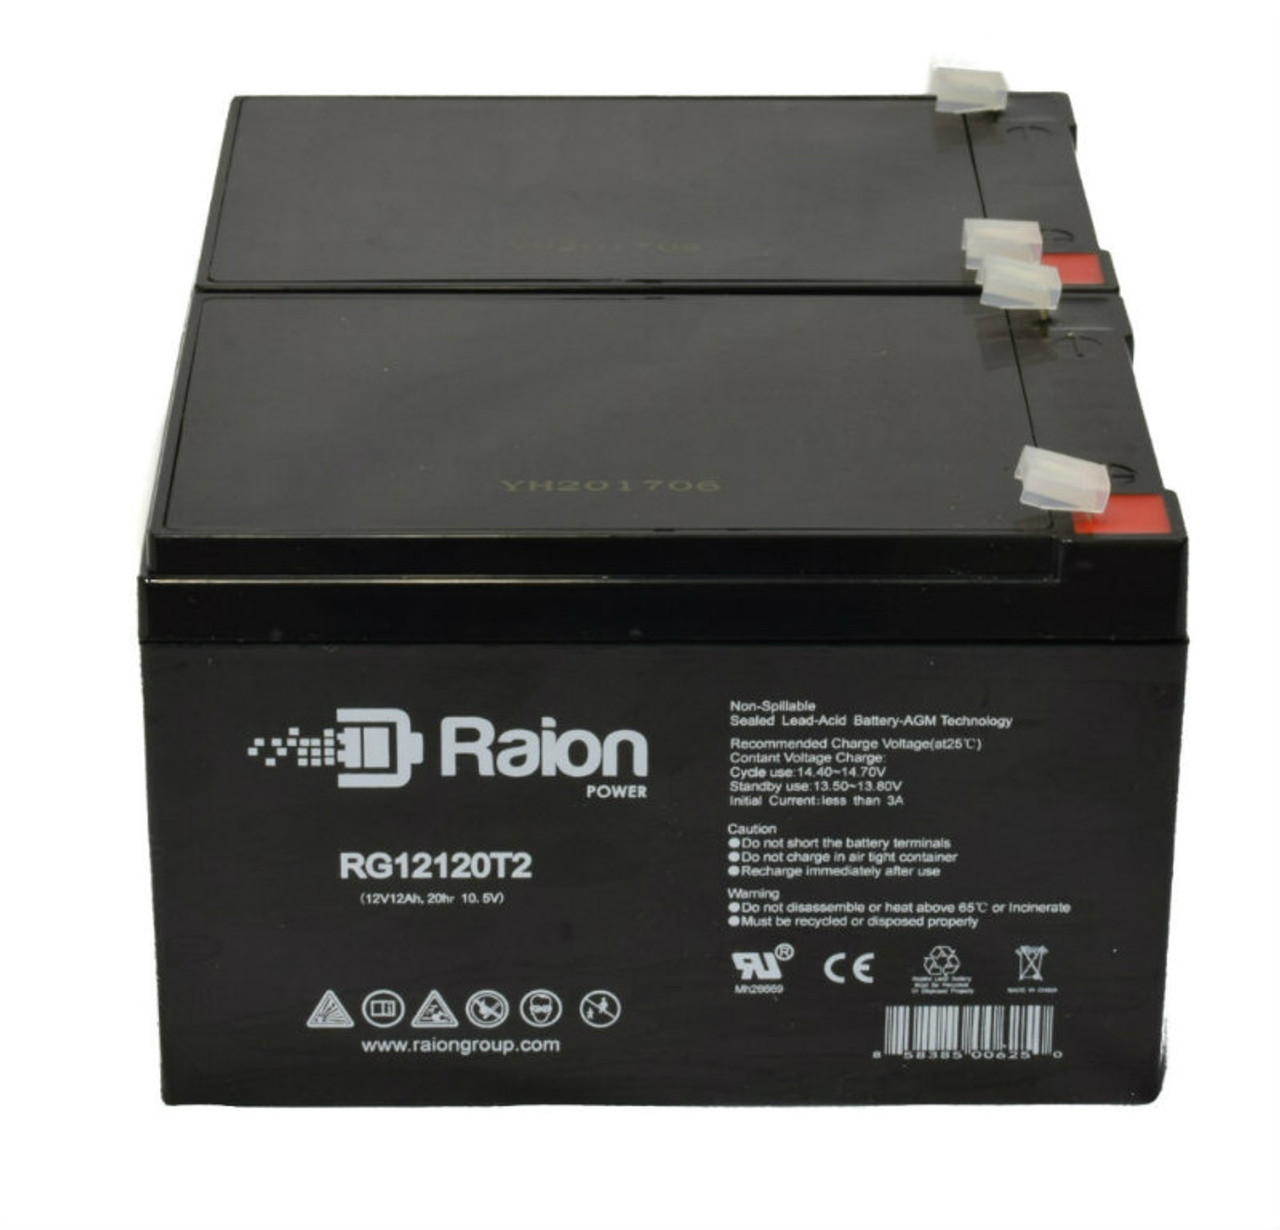 Raion Power 12V 12Ah Non-Spillable Compatible Replacement Battery for PM PM12120 - (2 Pack)